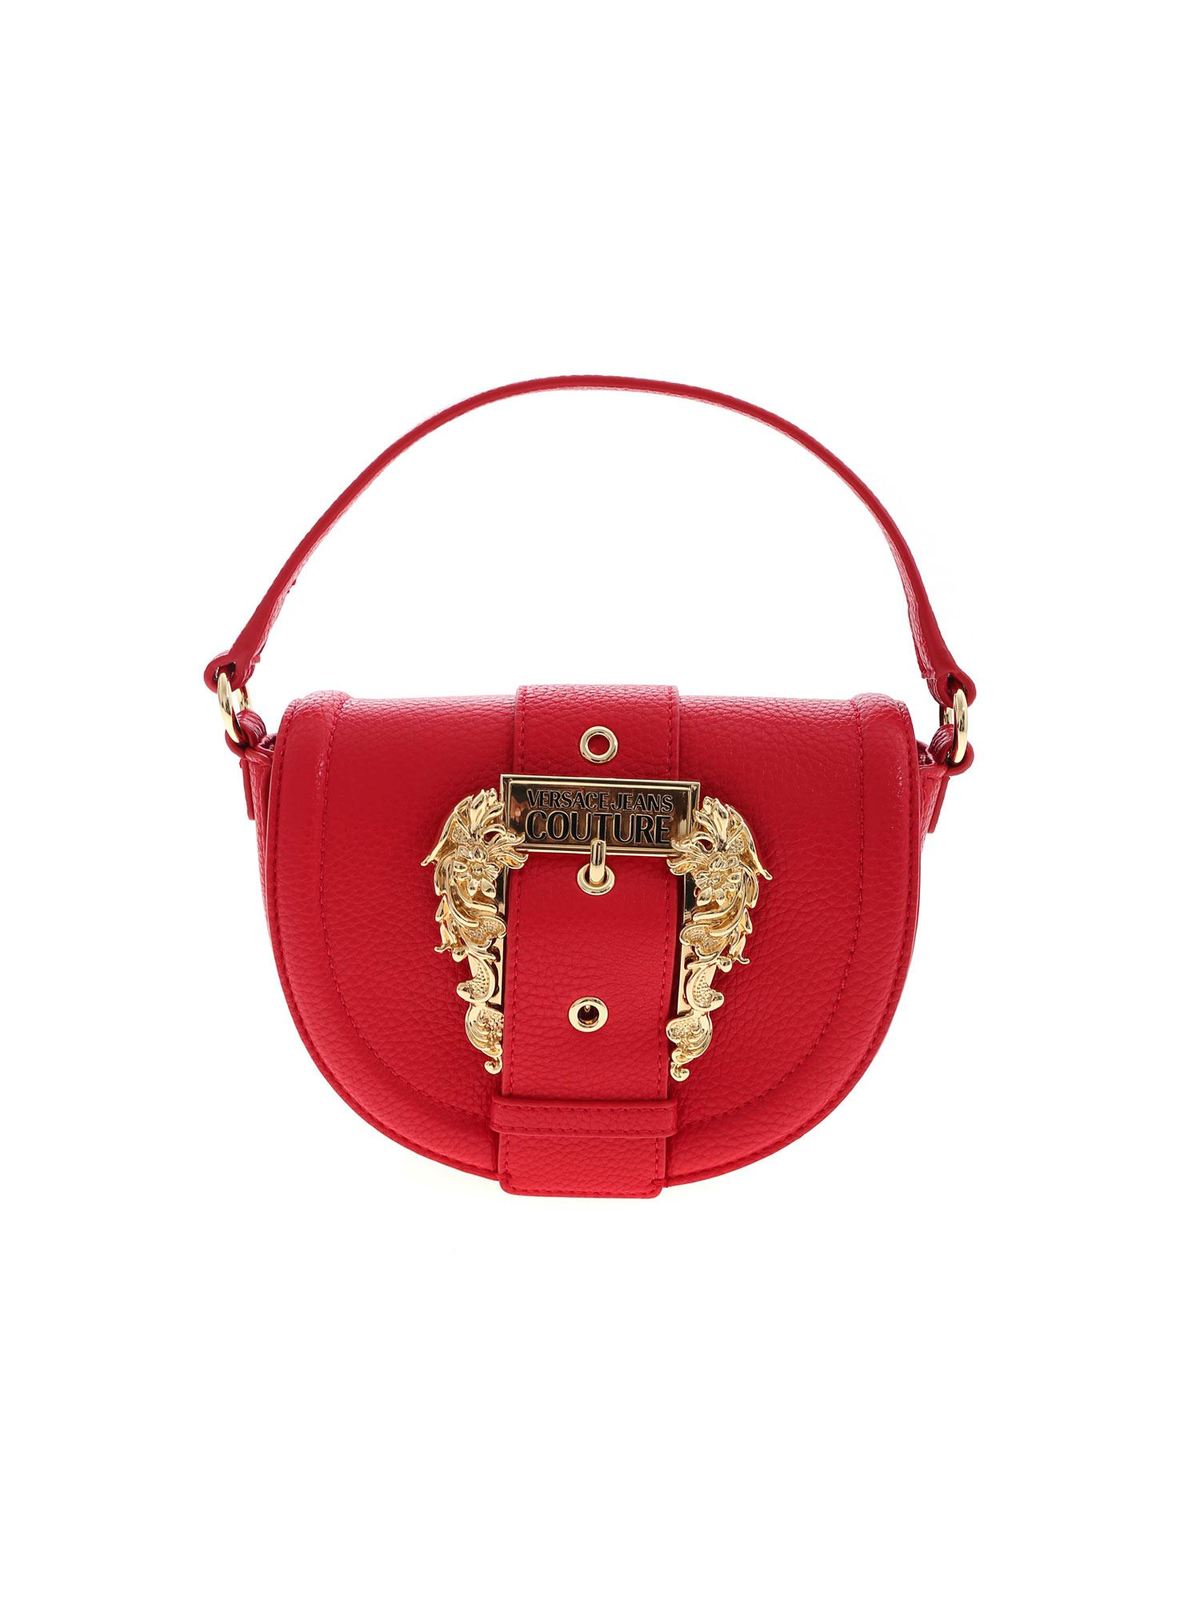 Versace Jeans Couture Leathers COUTURE HANDBAG IN RED